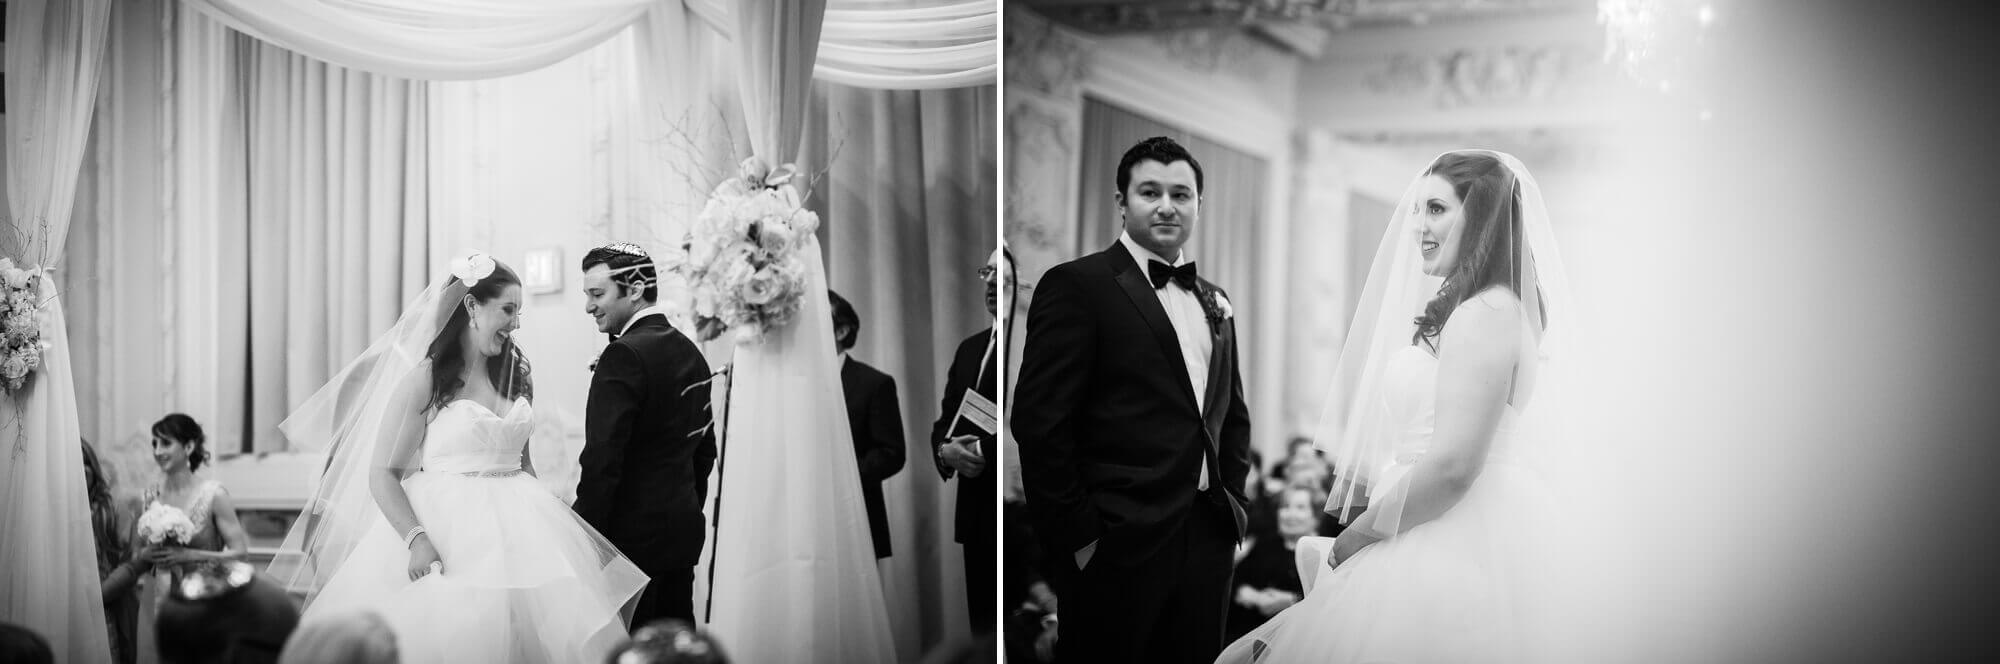 Black and white portraits of the bride and groom during their ceremony at the Omni King Edward Hotel in Toronto